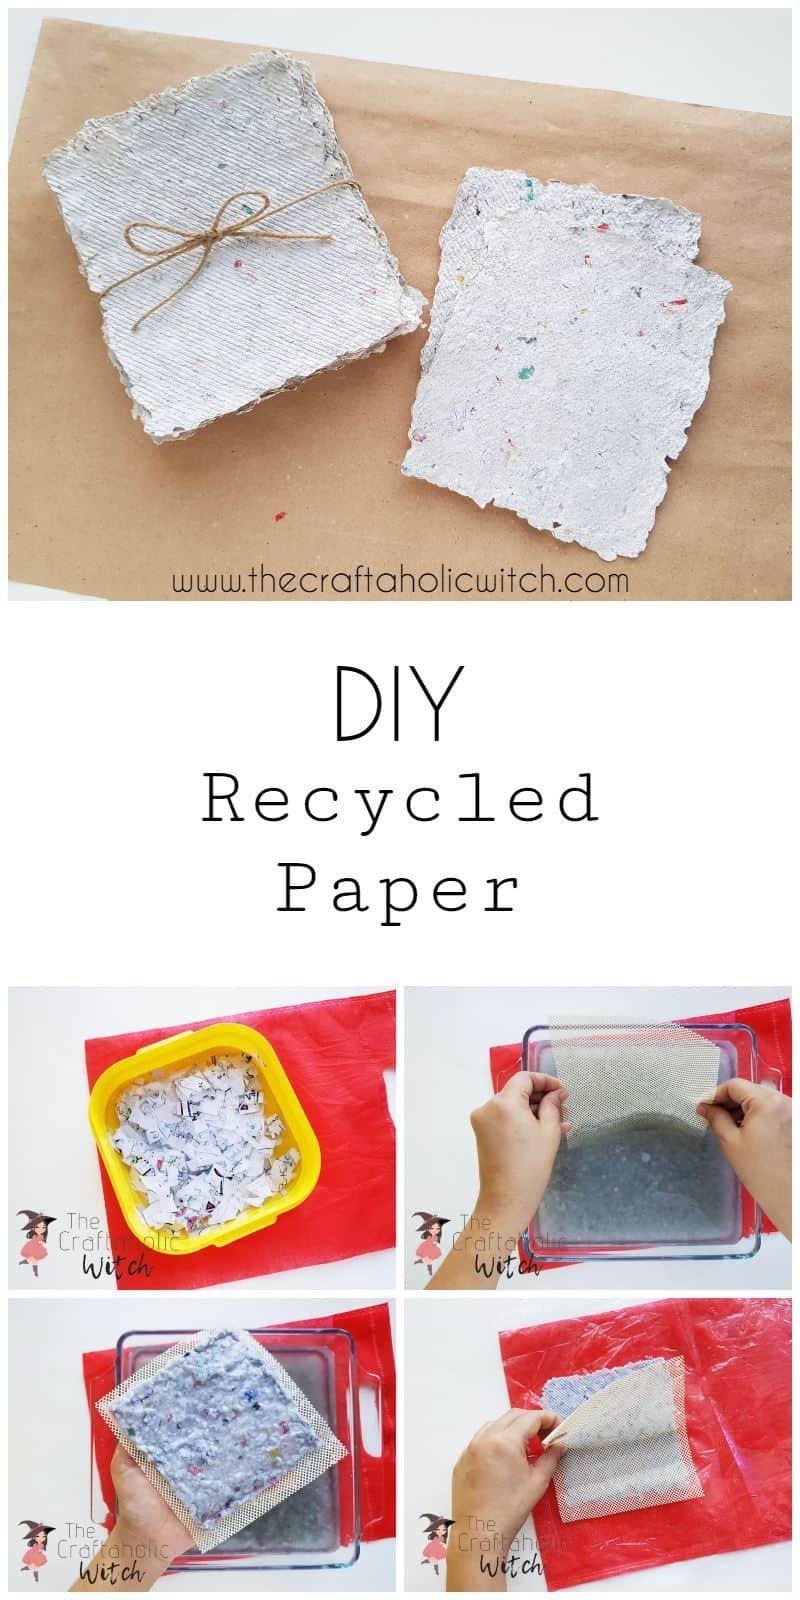 Here's How to Make Handmade Paper from Recycled Materials